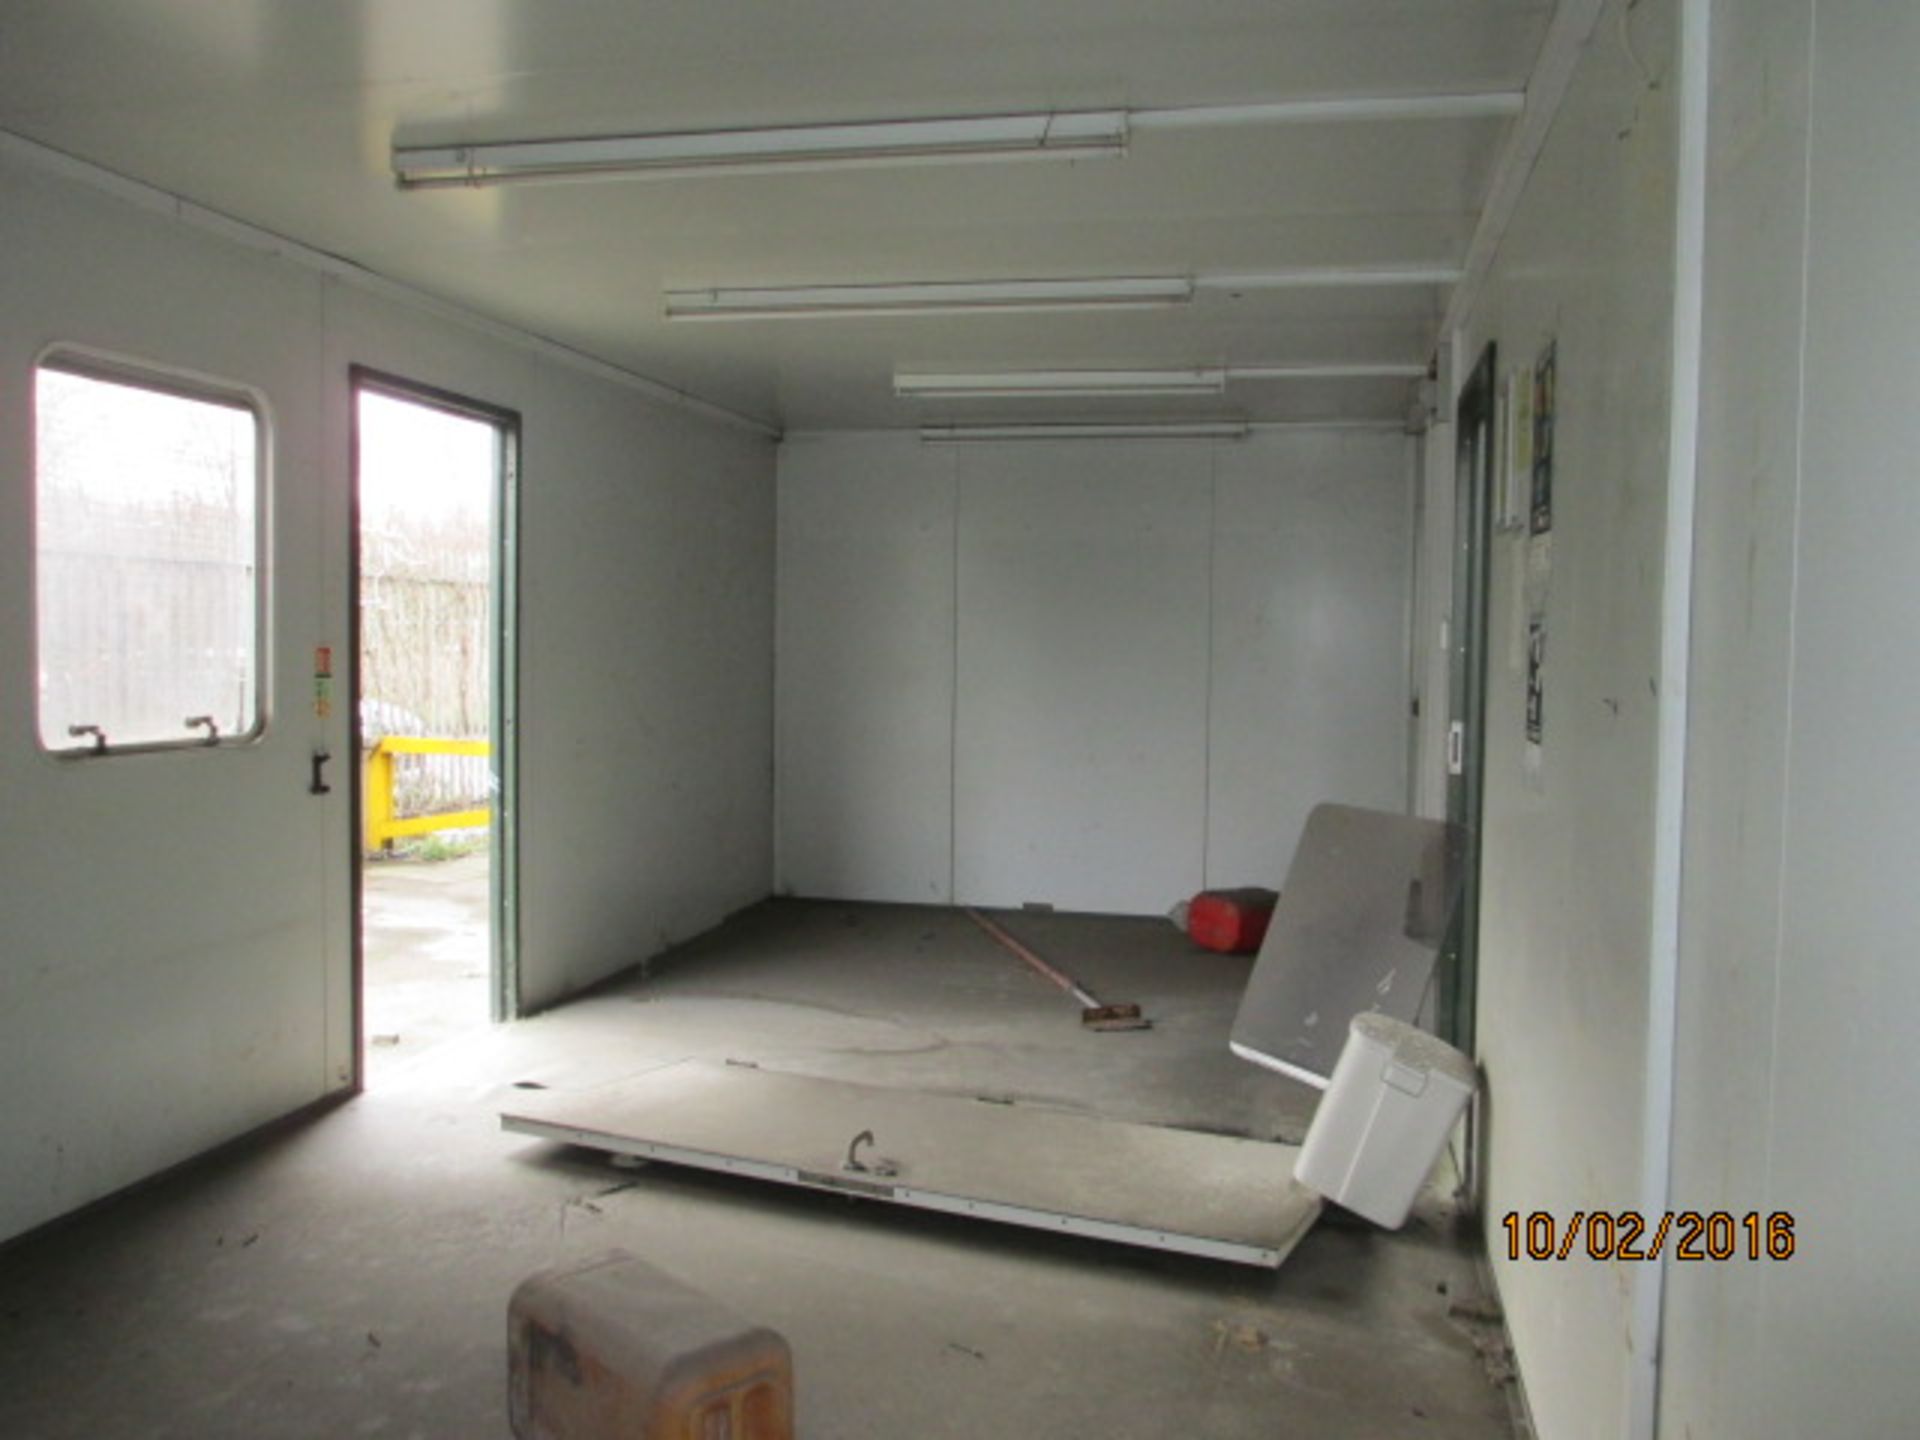 E47506 32X10 STEELCLAD - 2 OFFICES - Image 3 of 4